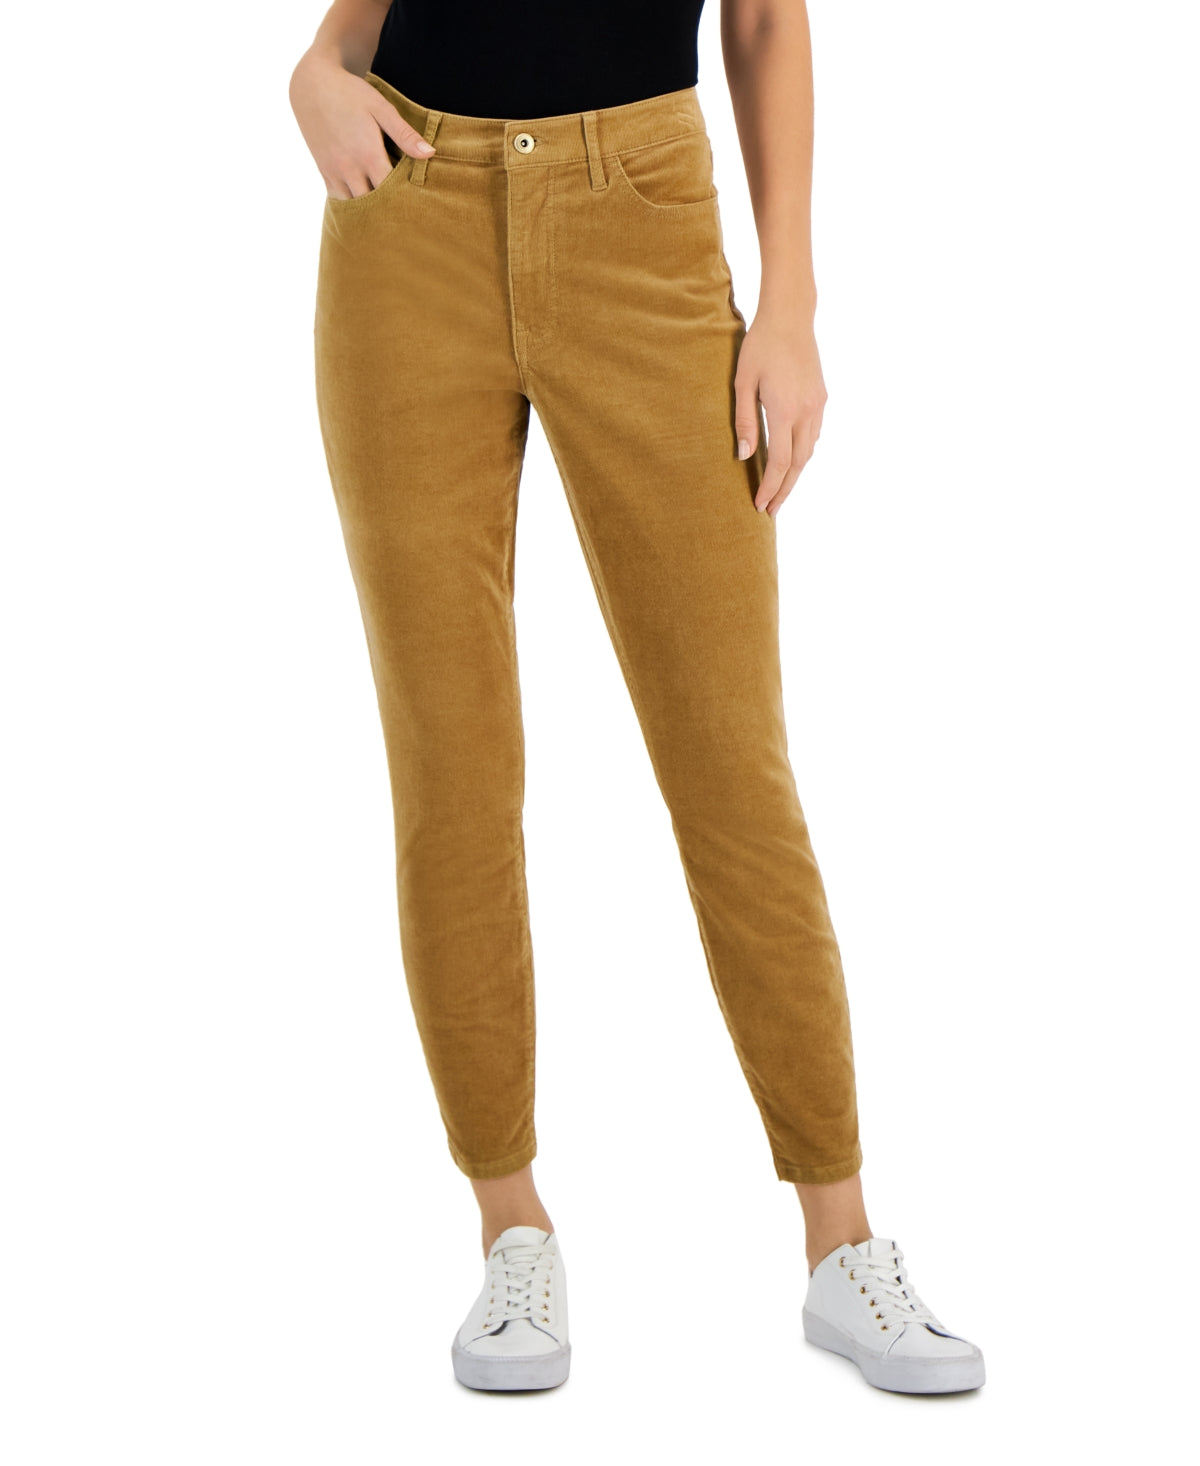 Tommy Hilfiger Women's Corduroy Skinny Ankle Pants Brown Size 14